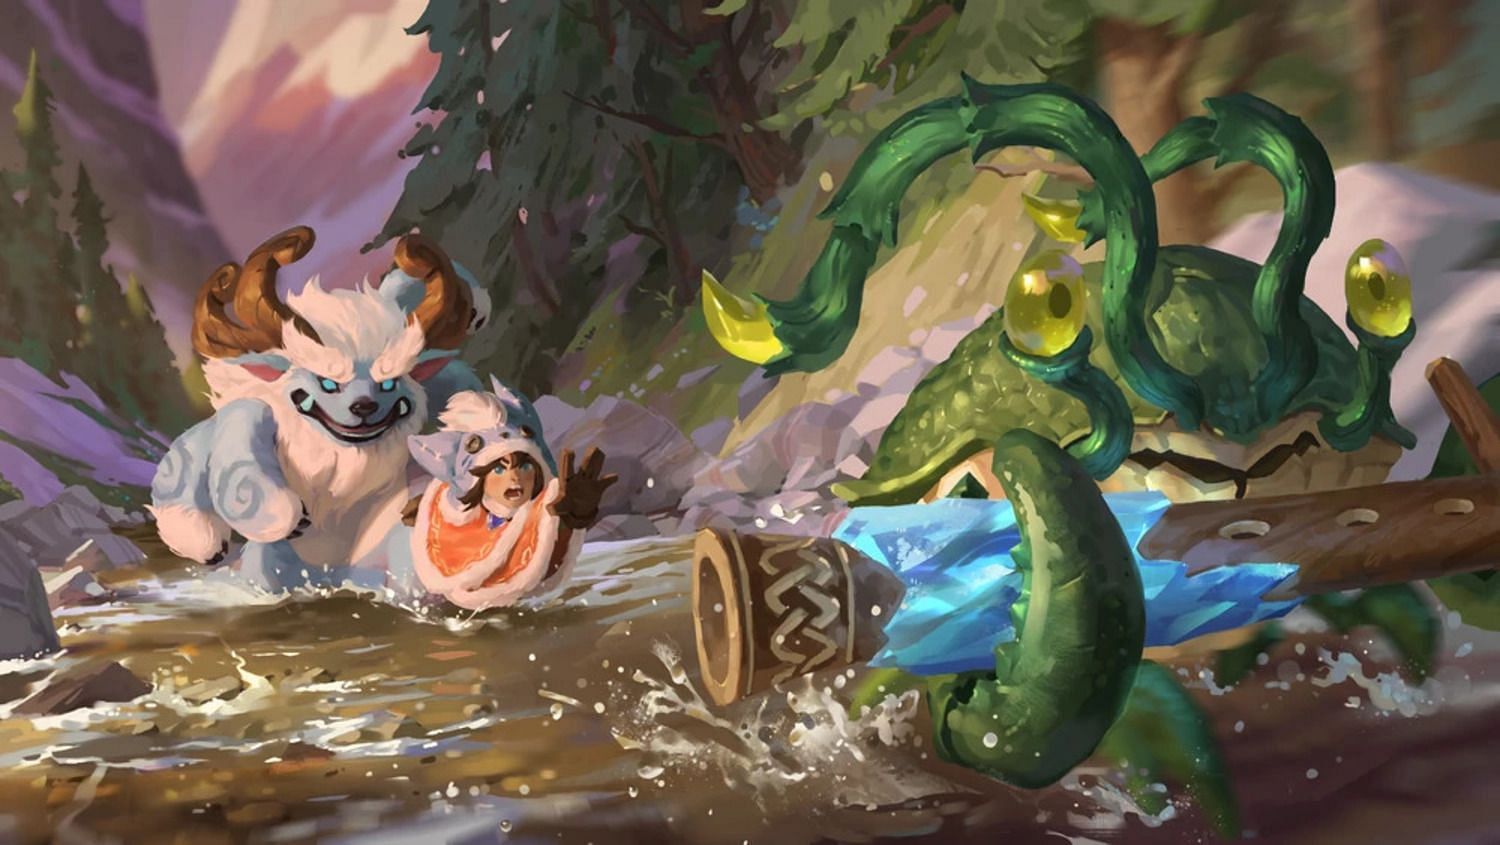 Scuttle Crab with Nunu &amp; Willump for League of Legends&#039; short story, &quot;It&#039;s Me and You&quot; Illustration (by Riot Artist Horace &#039;Hozure&#039; Hsu)